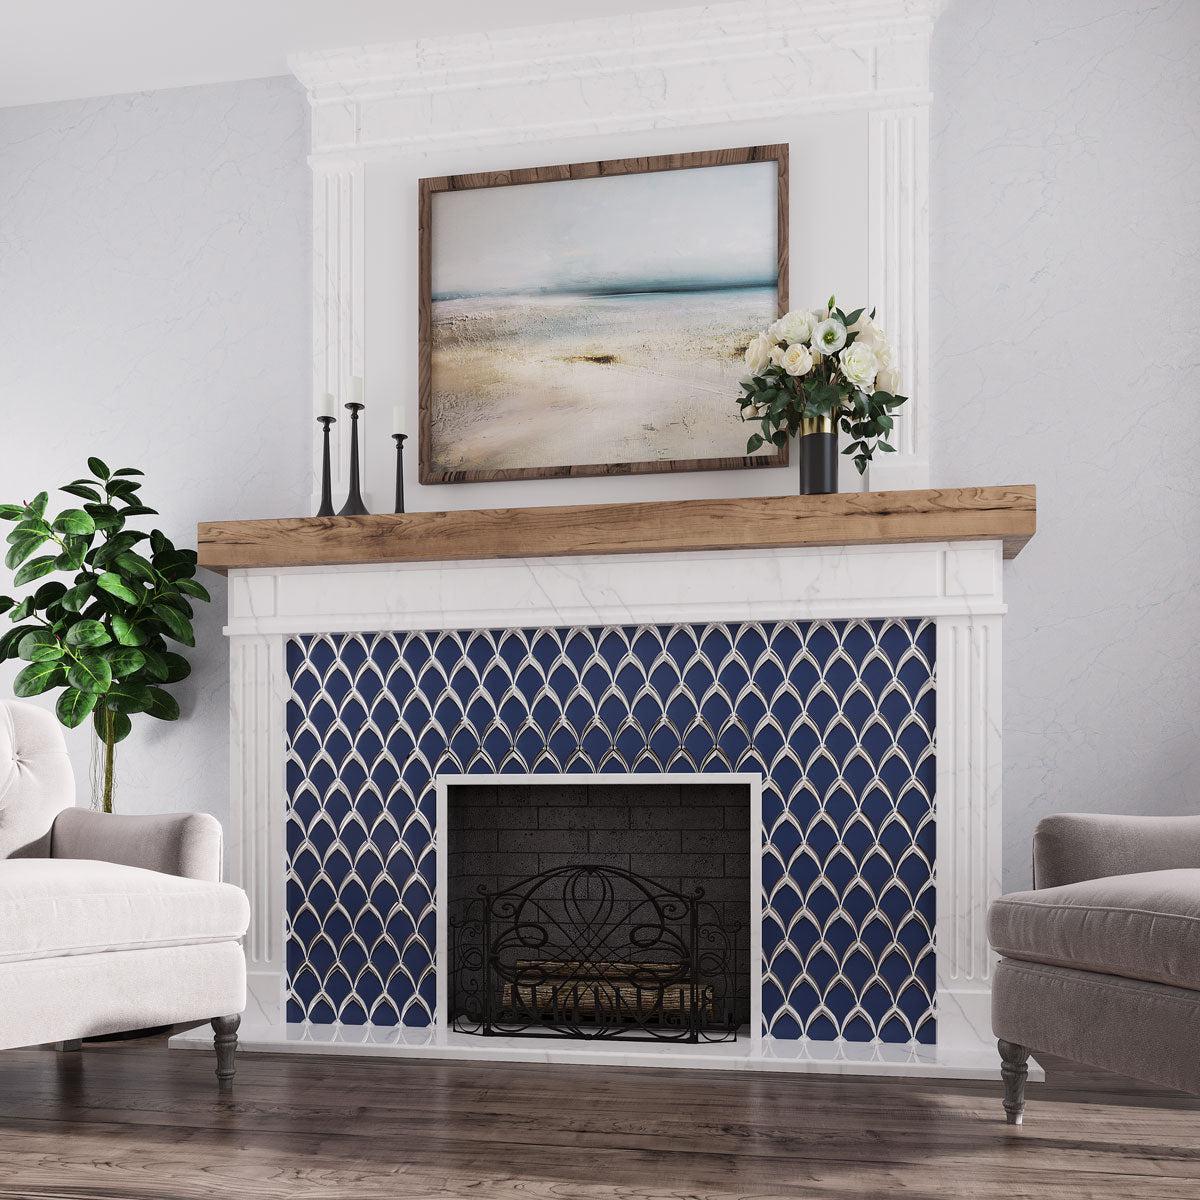 Coastal Glam living room with blue frosted glass tile fireplace surround for an Art Deco detail